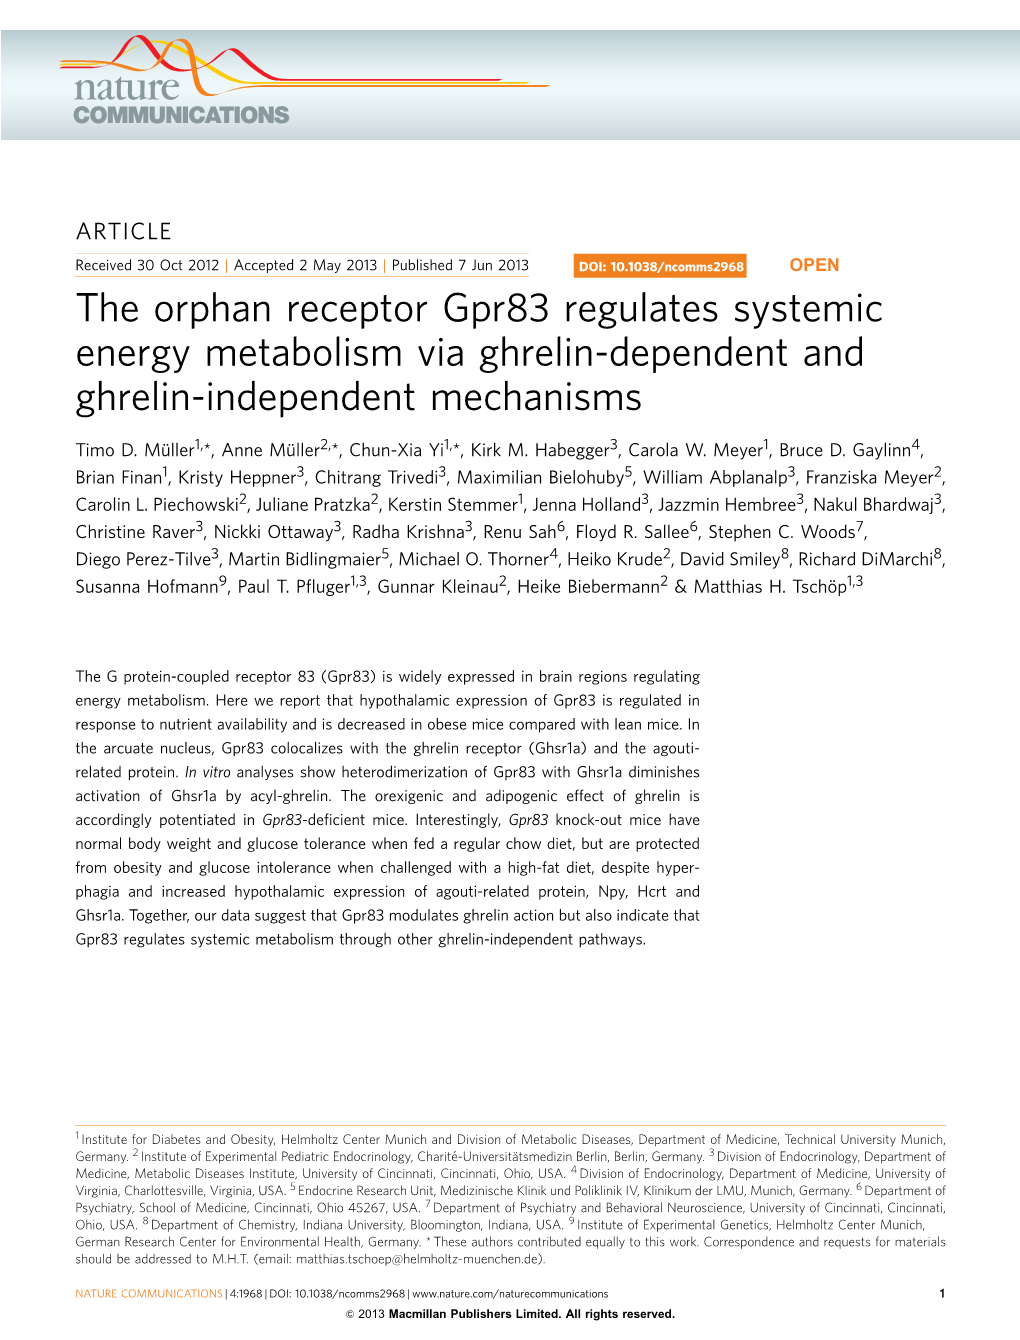 The Orphan Receptor Gpr83 Regulates Systemic Energy Metabolism Via Ghrelin-Dependent and Ghrelin-Independent Mechanisms